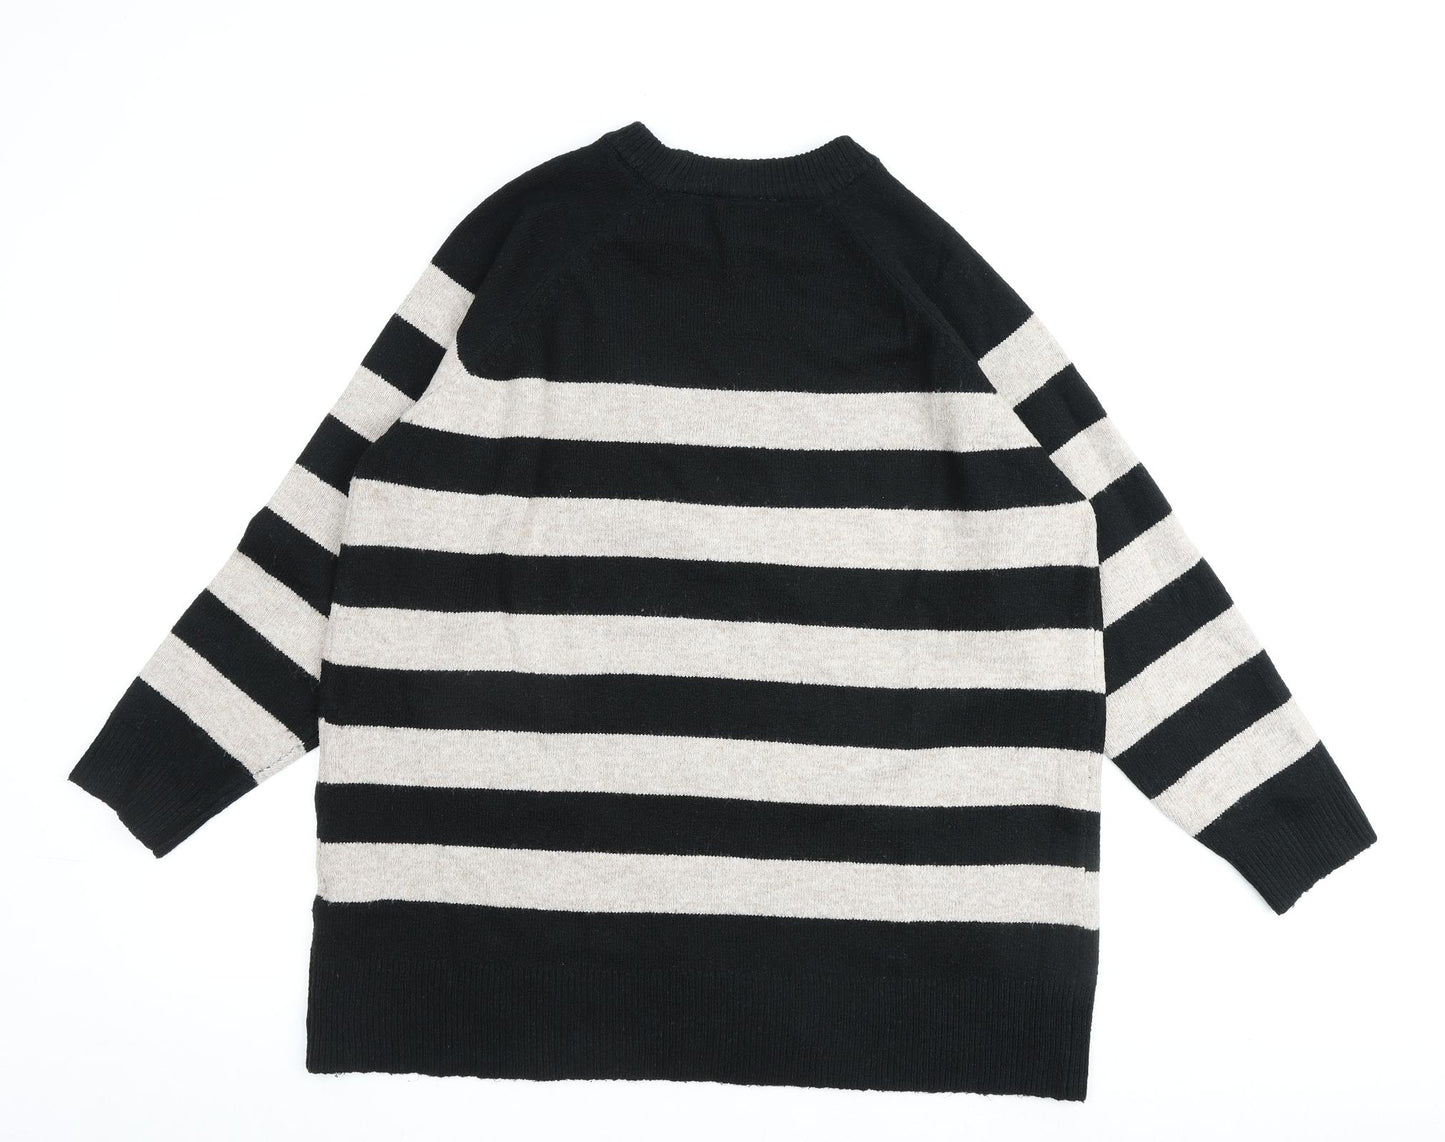 New Look Womens Black Round Neck Striped Acrylic Pullover Jumper Size L